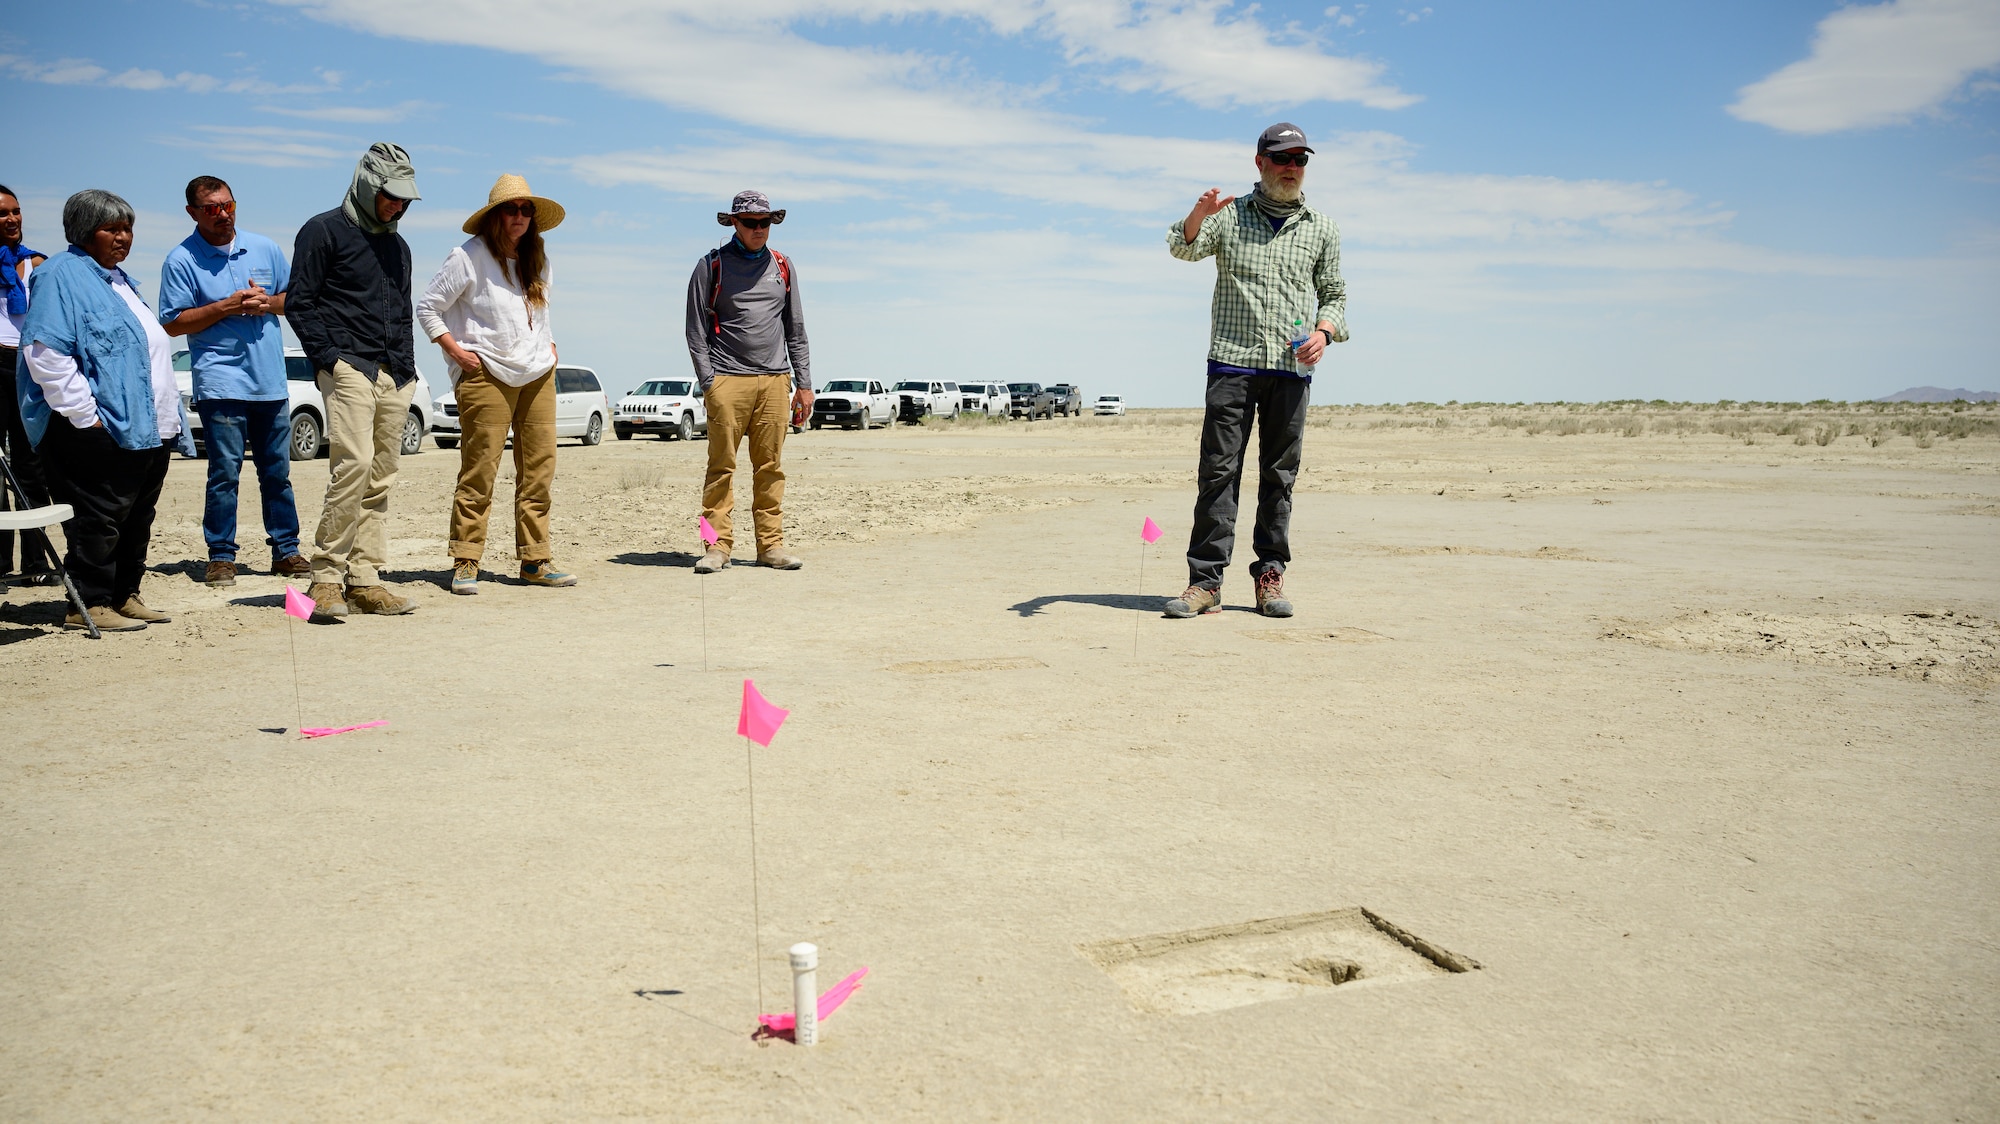 A footprint appears on an archaeological site marked with a pink pin flag with Daron Duke and others in the background.